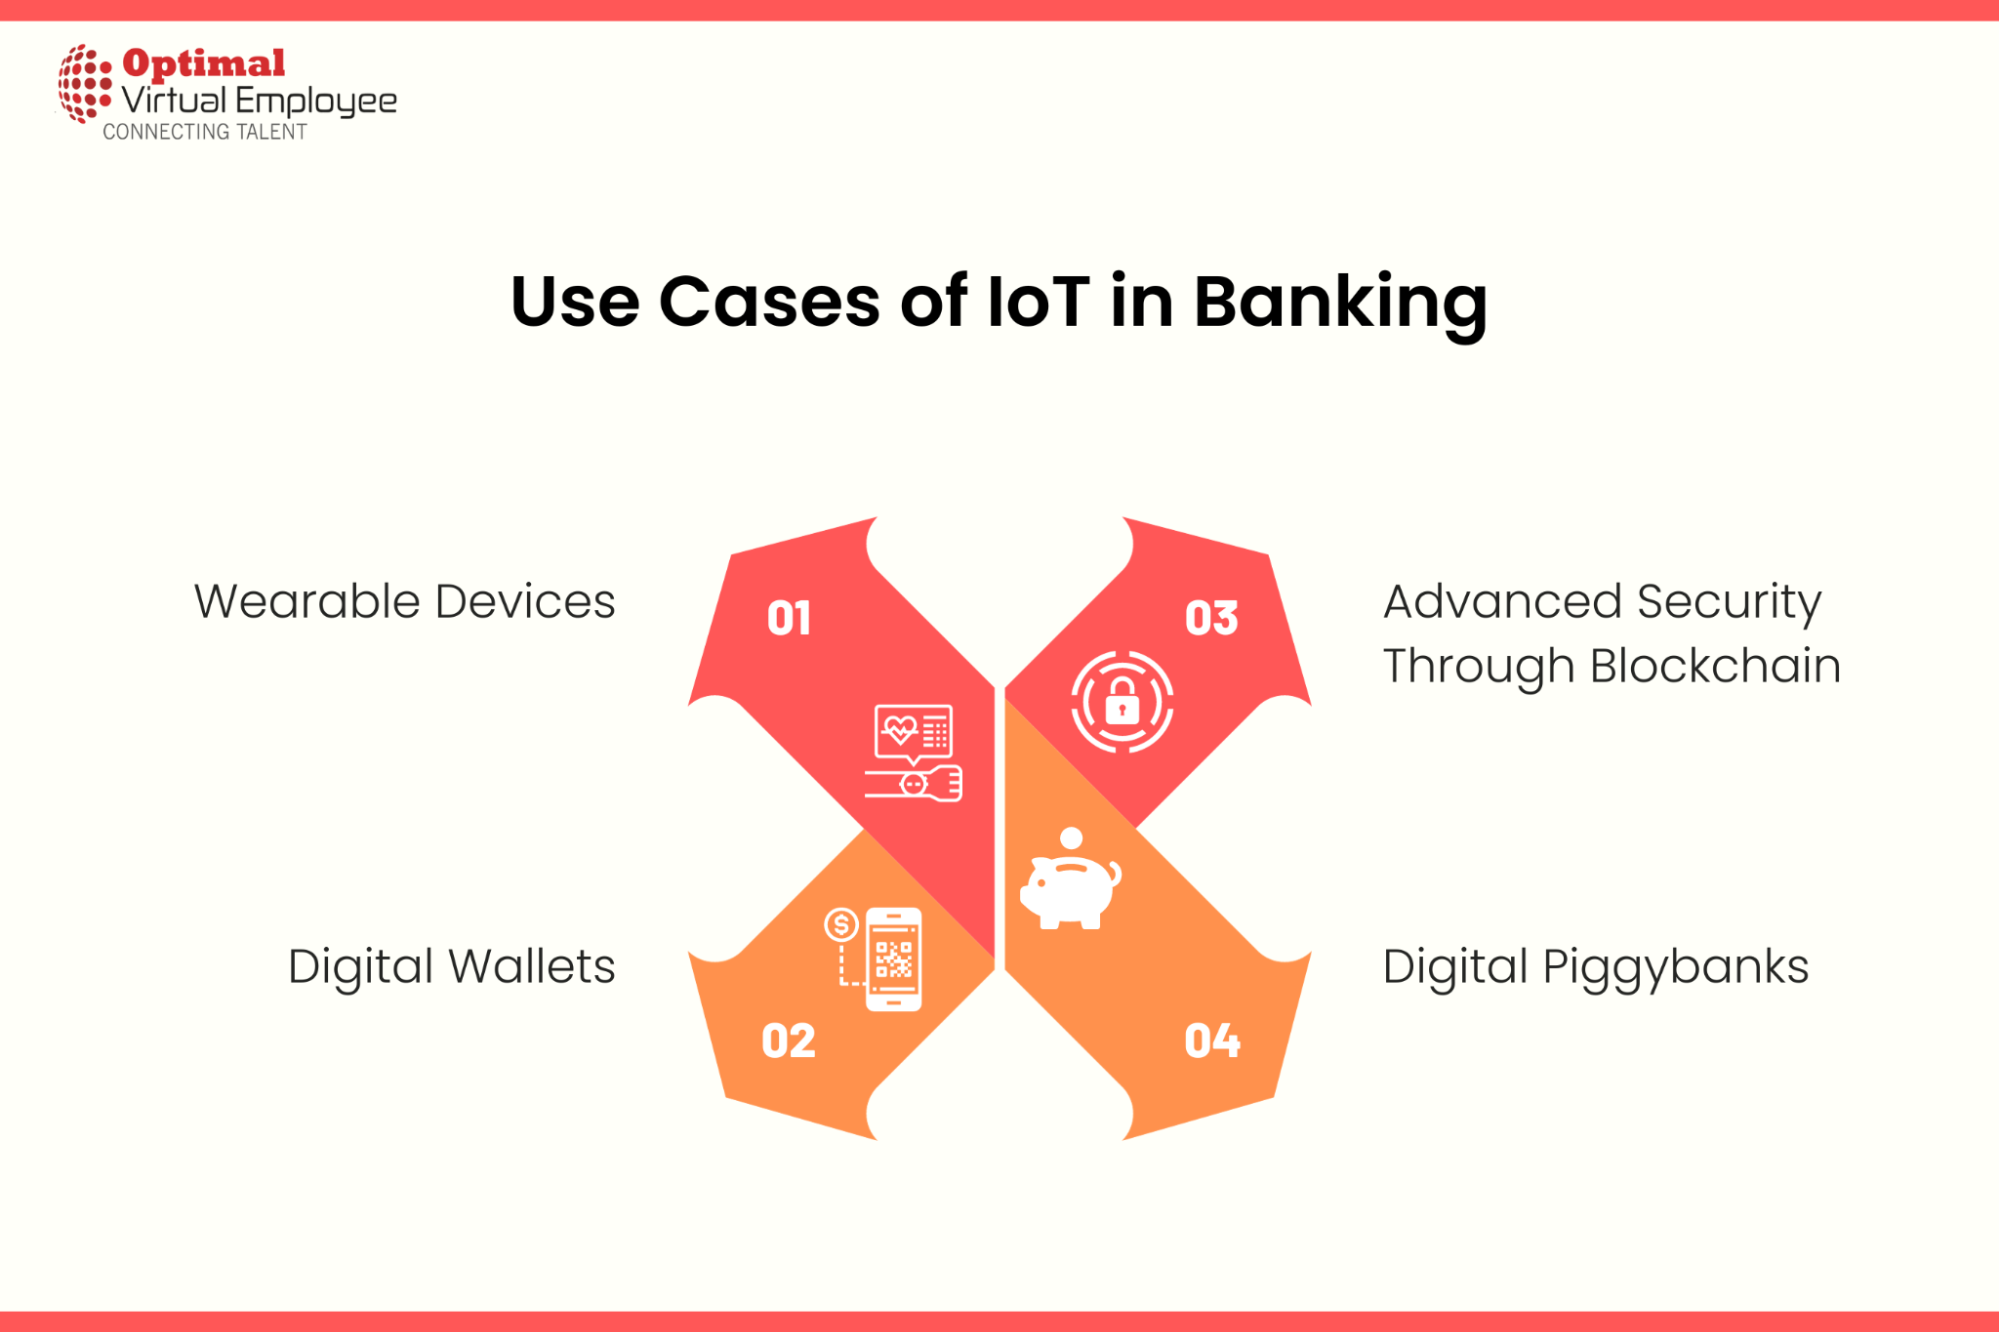 Use Cases of IoT in Banking